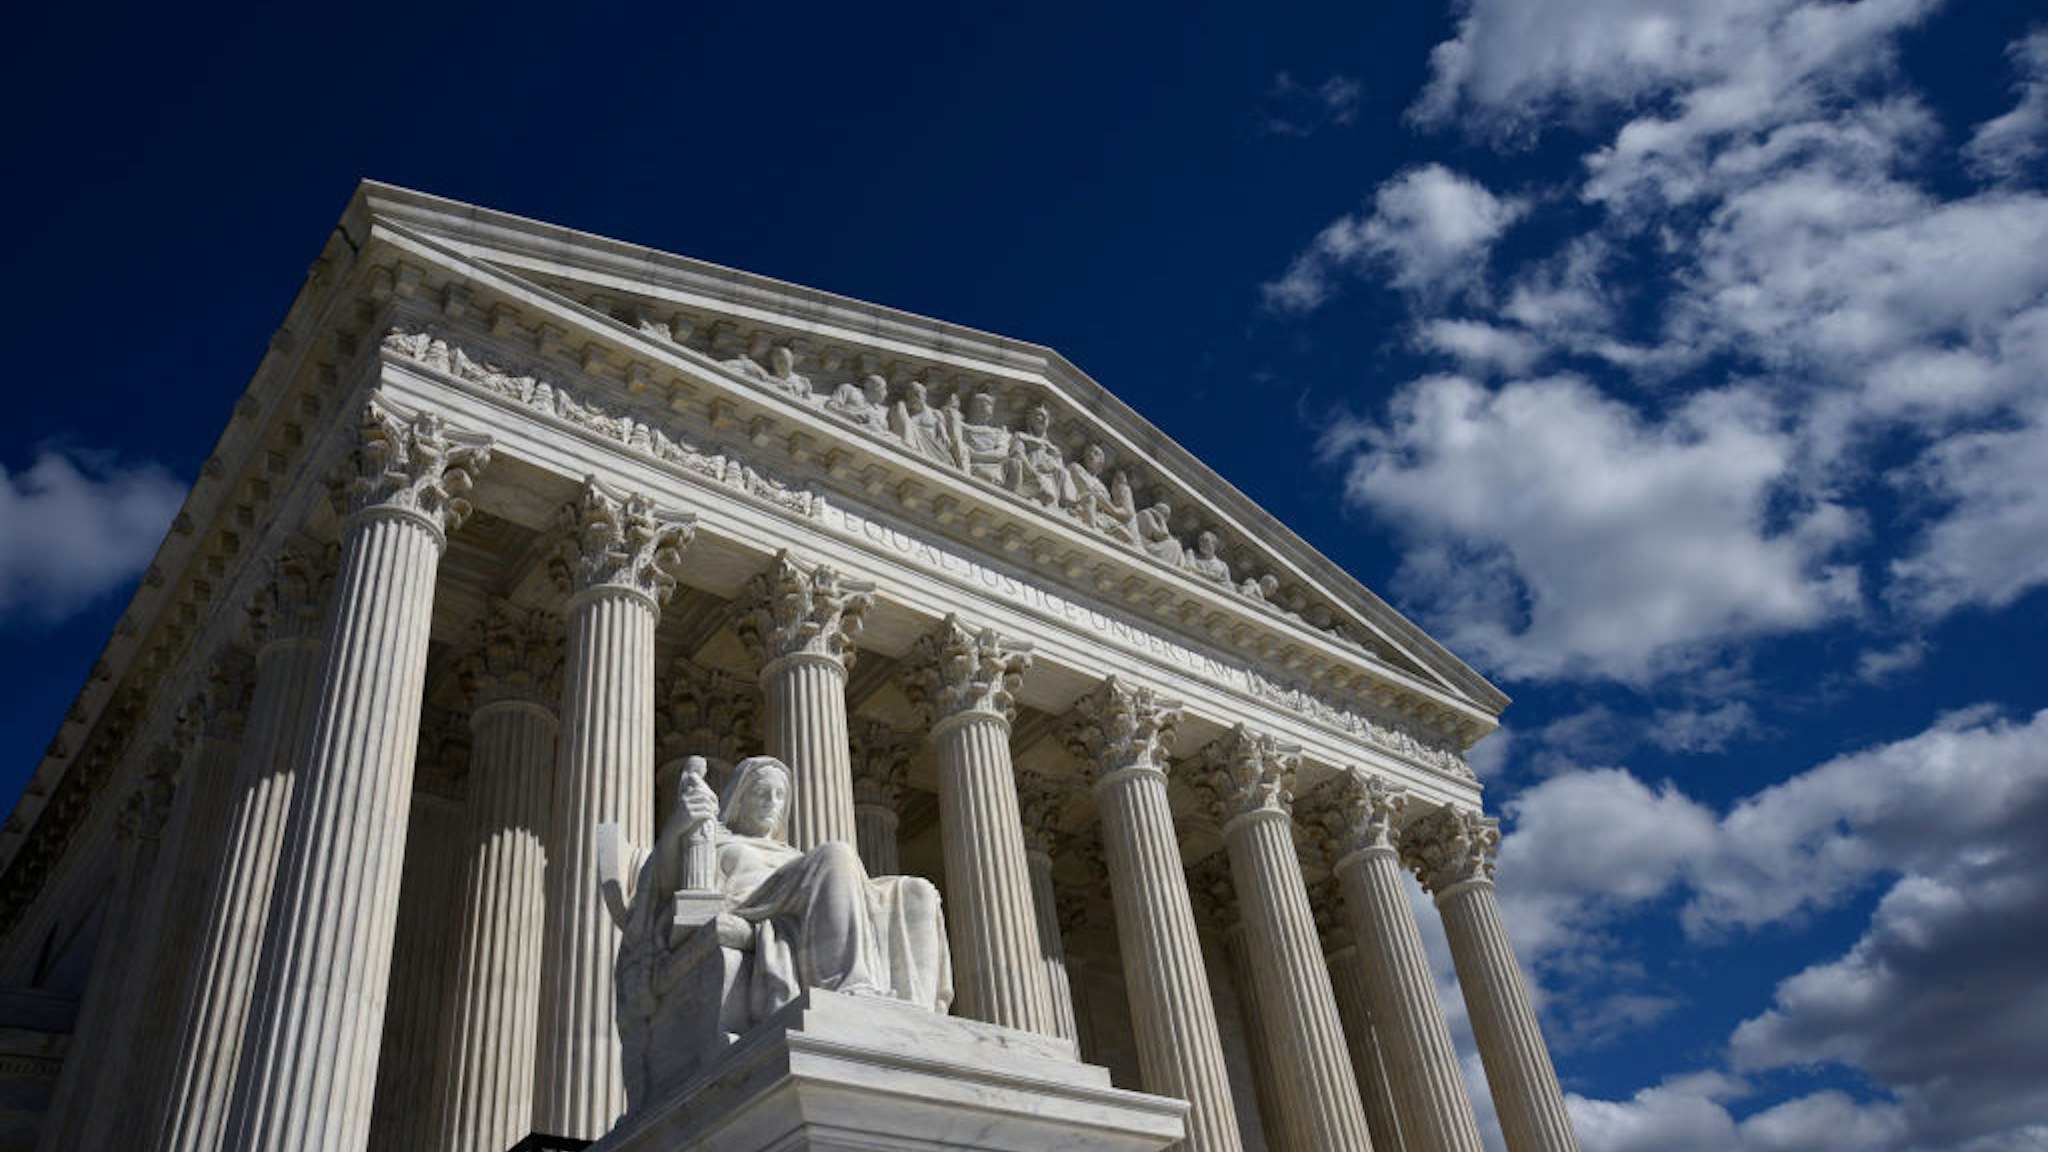 WASHINGTON, D.C. - APRIL 19, 2018: The U.S. Supreme Court Building in Washington, D.C., is the seat of the Supreme Court of the United States and the Judicial Branch of government. (Photo by Robert Alexander/Getty Images)